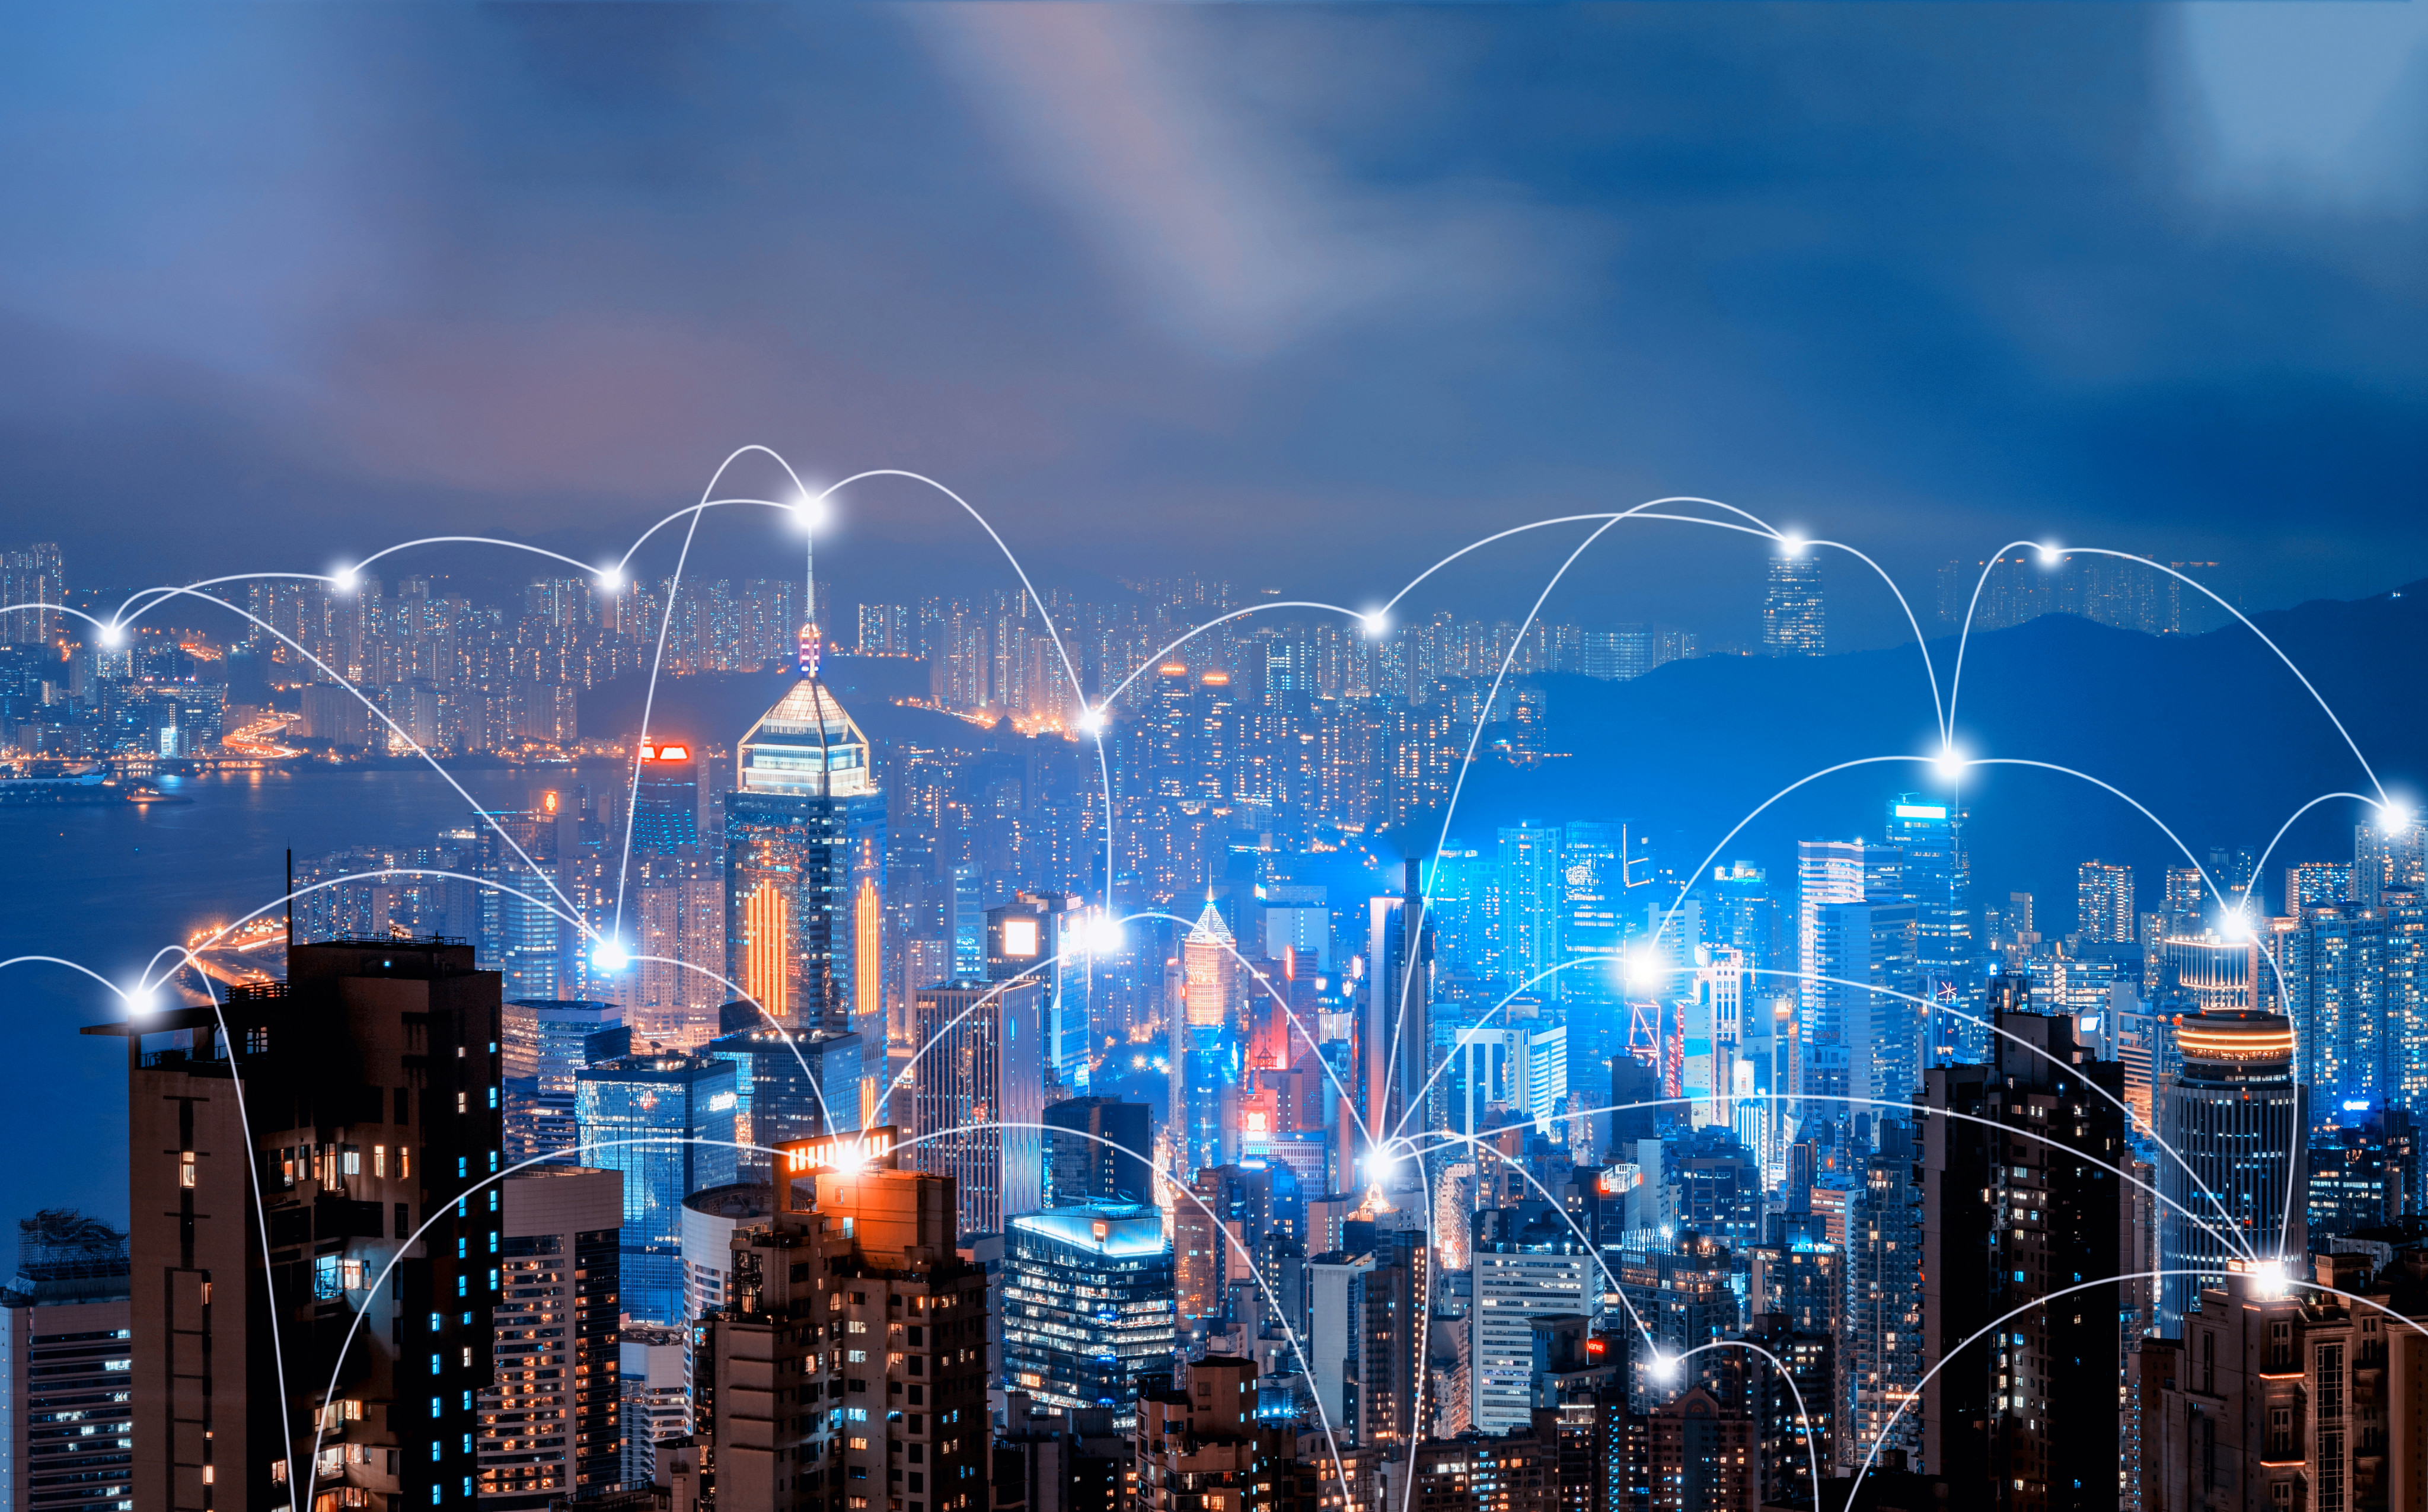 In 2022, can Hong Kong finally embrace the digital revolution and pivot resolutely in the direction of becoming a smart city? Photo: Shutterstock